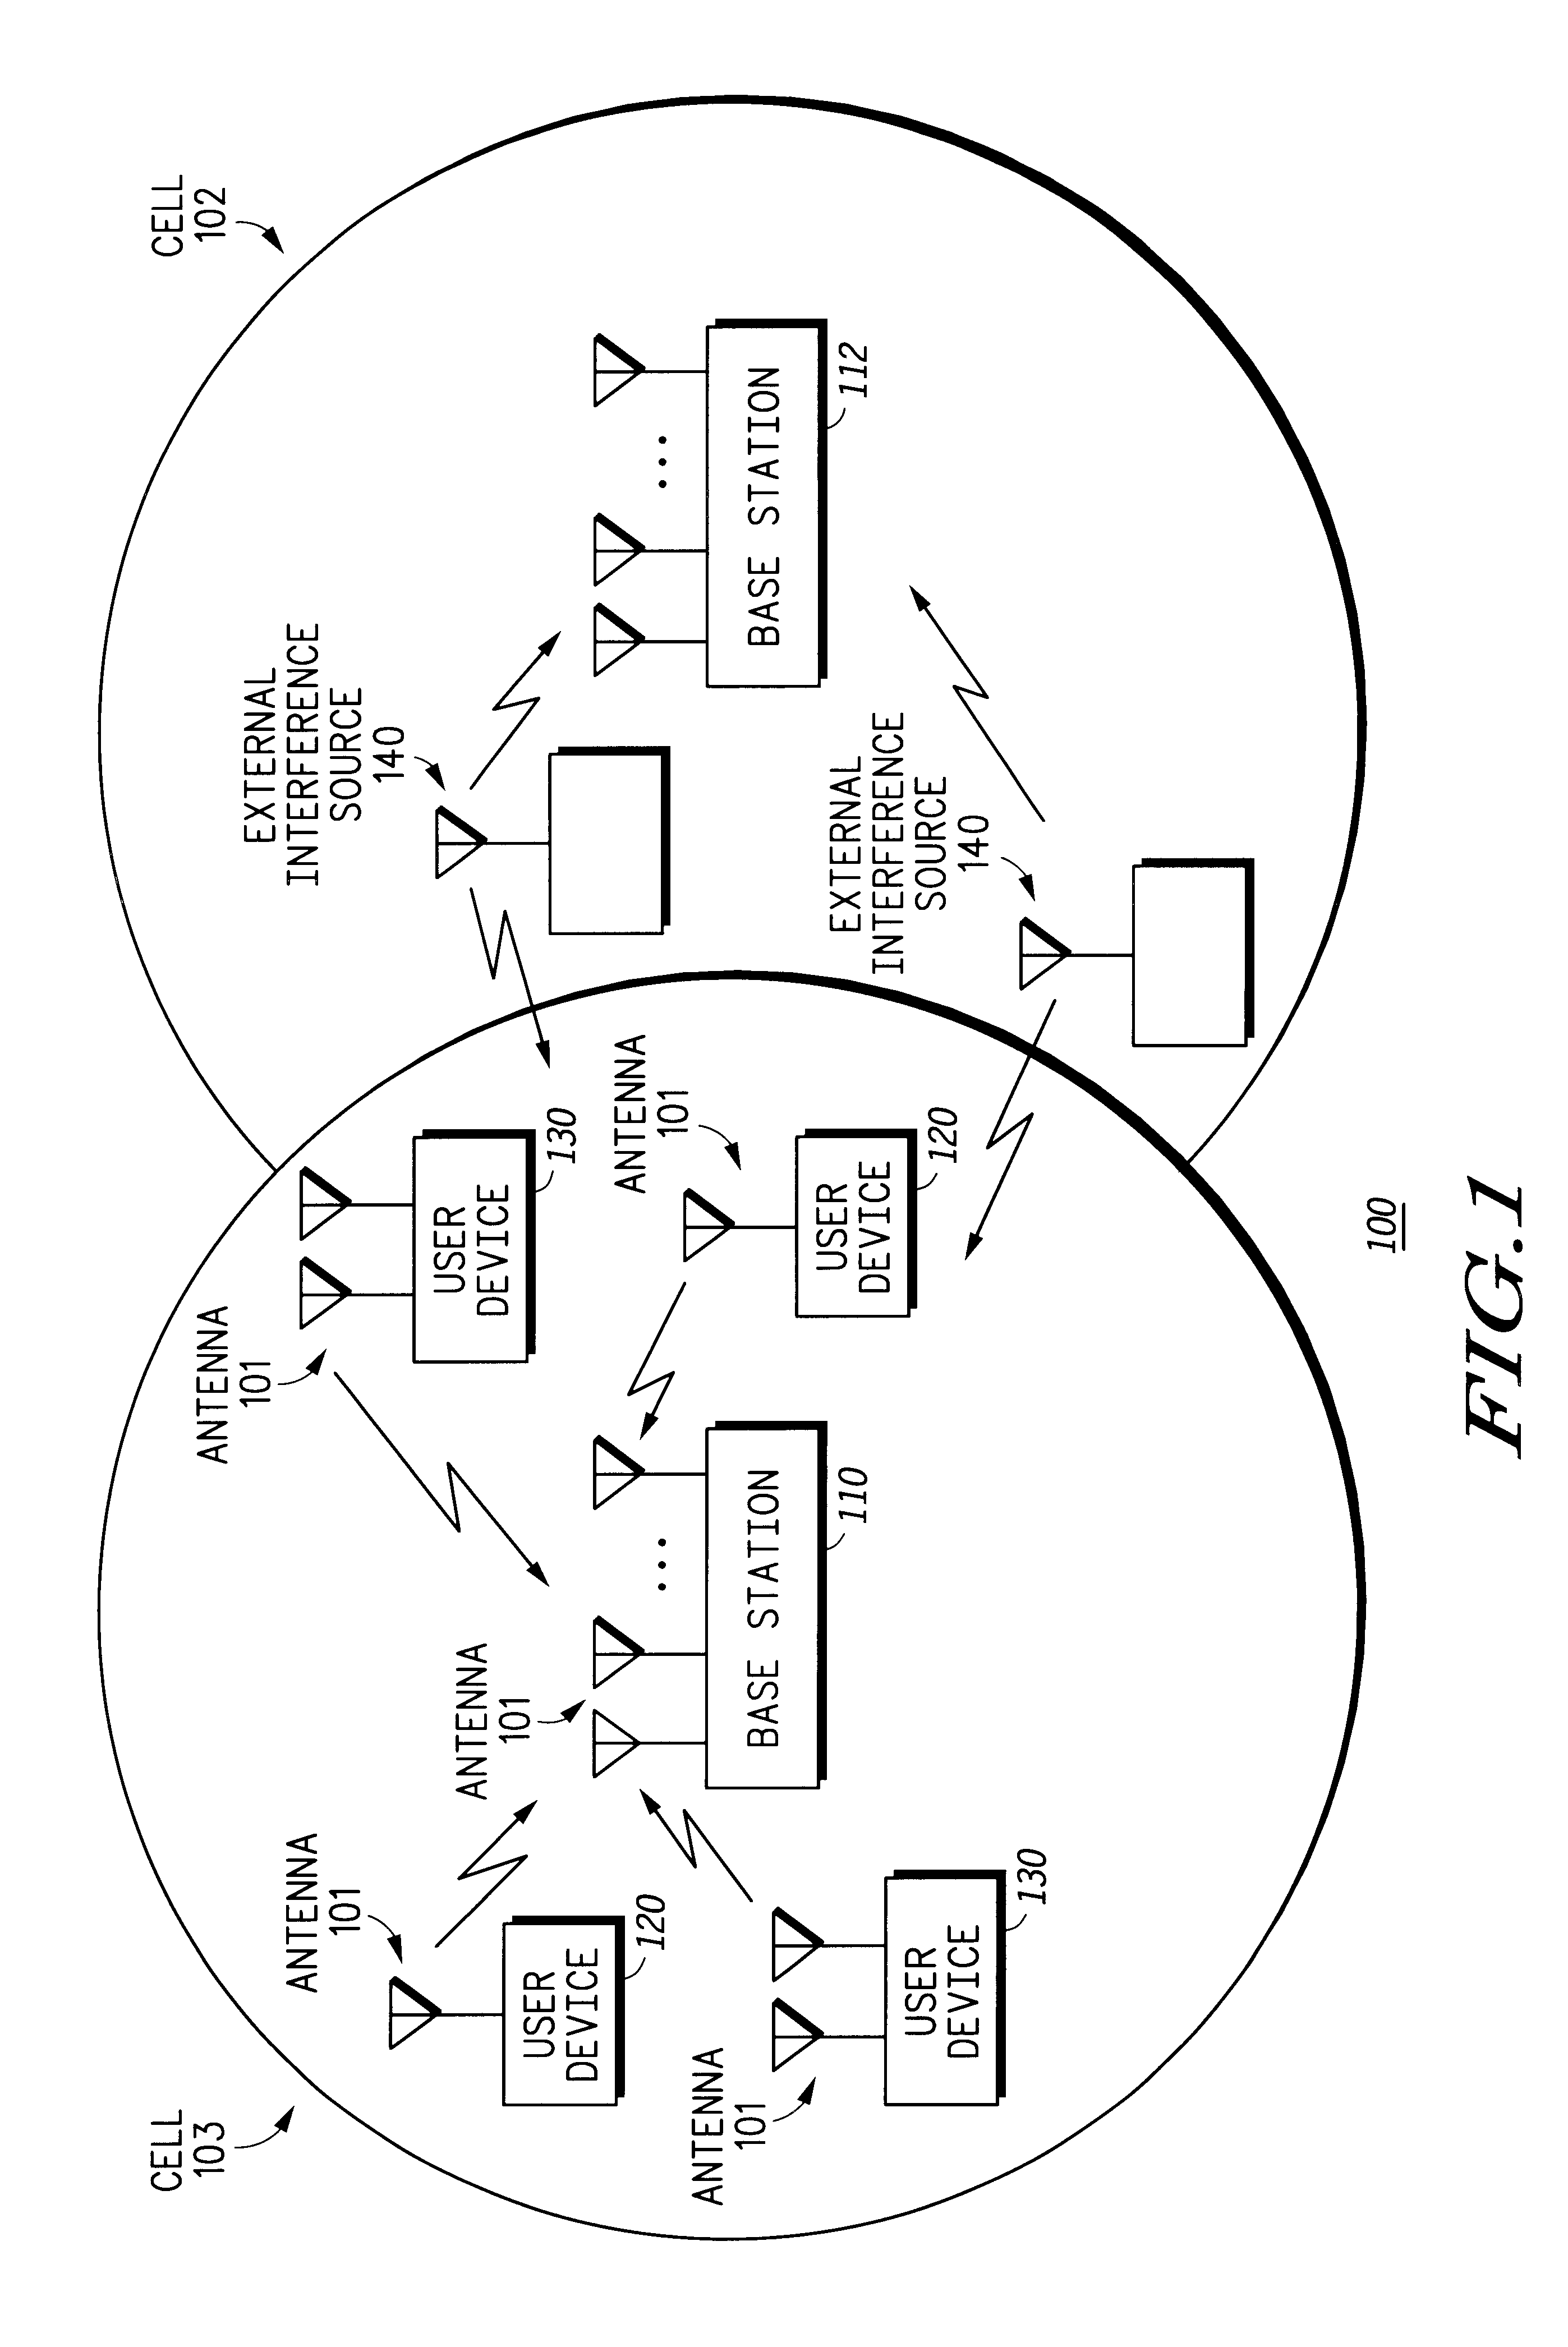 Method and device for multi-user channel estimation